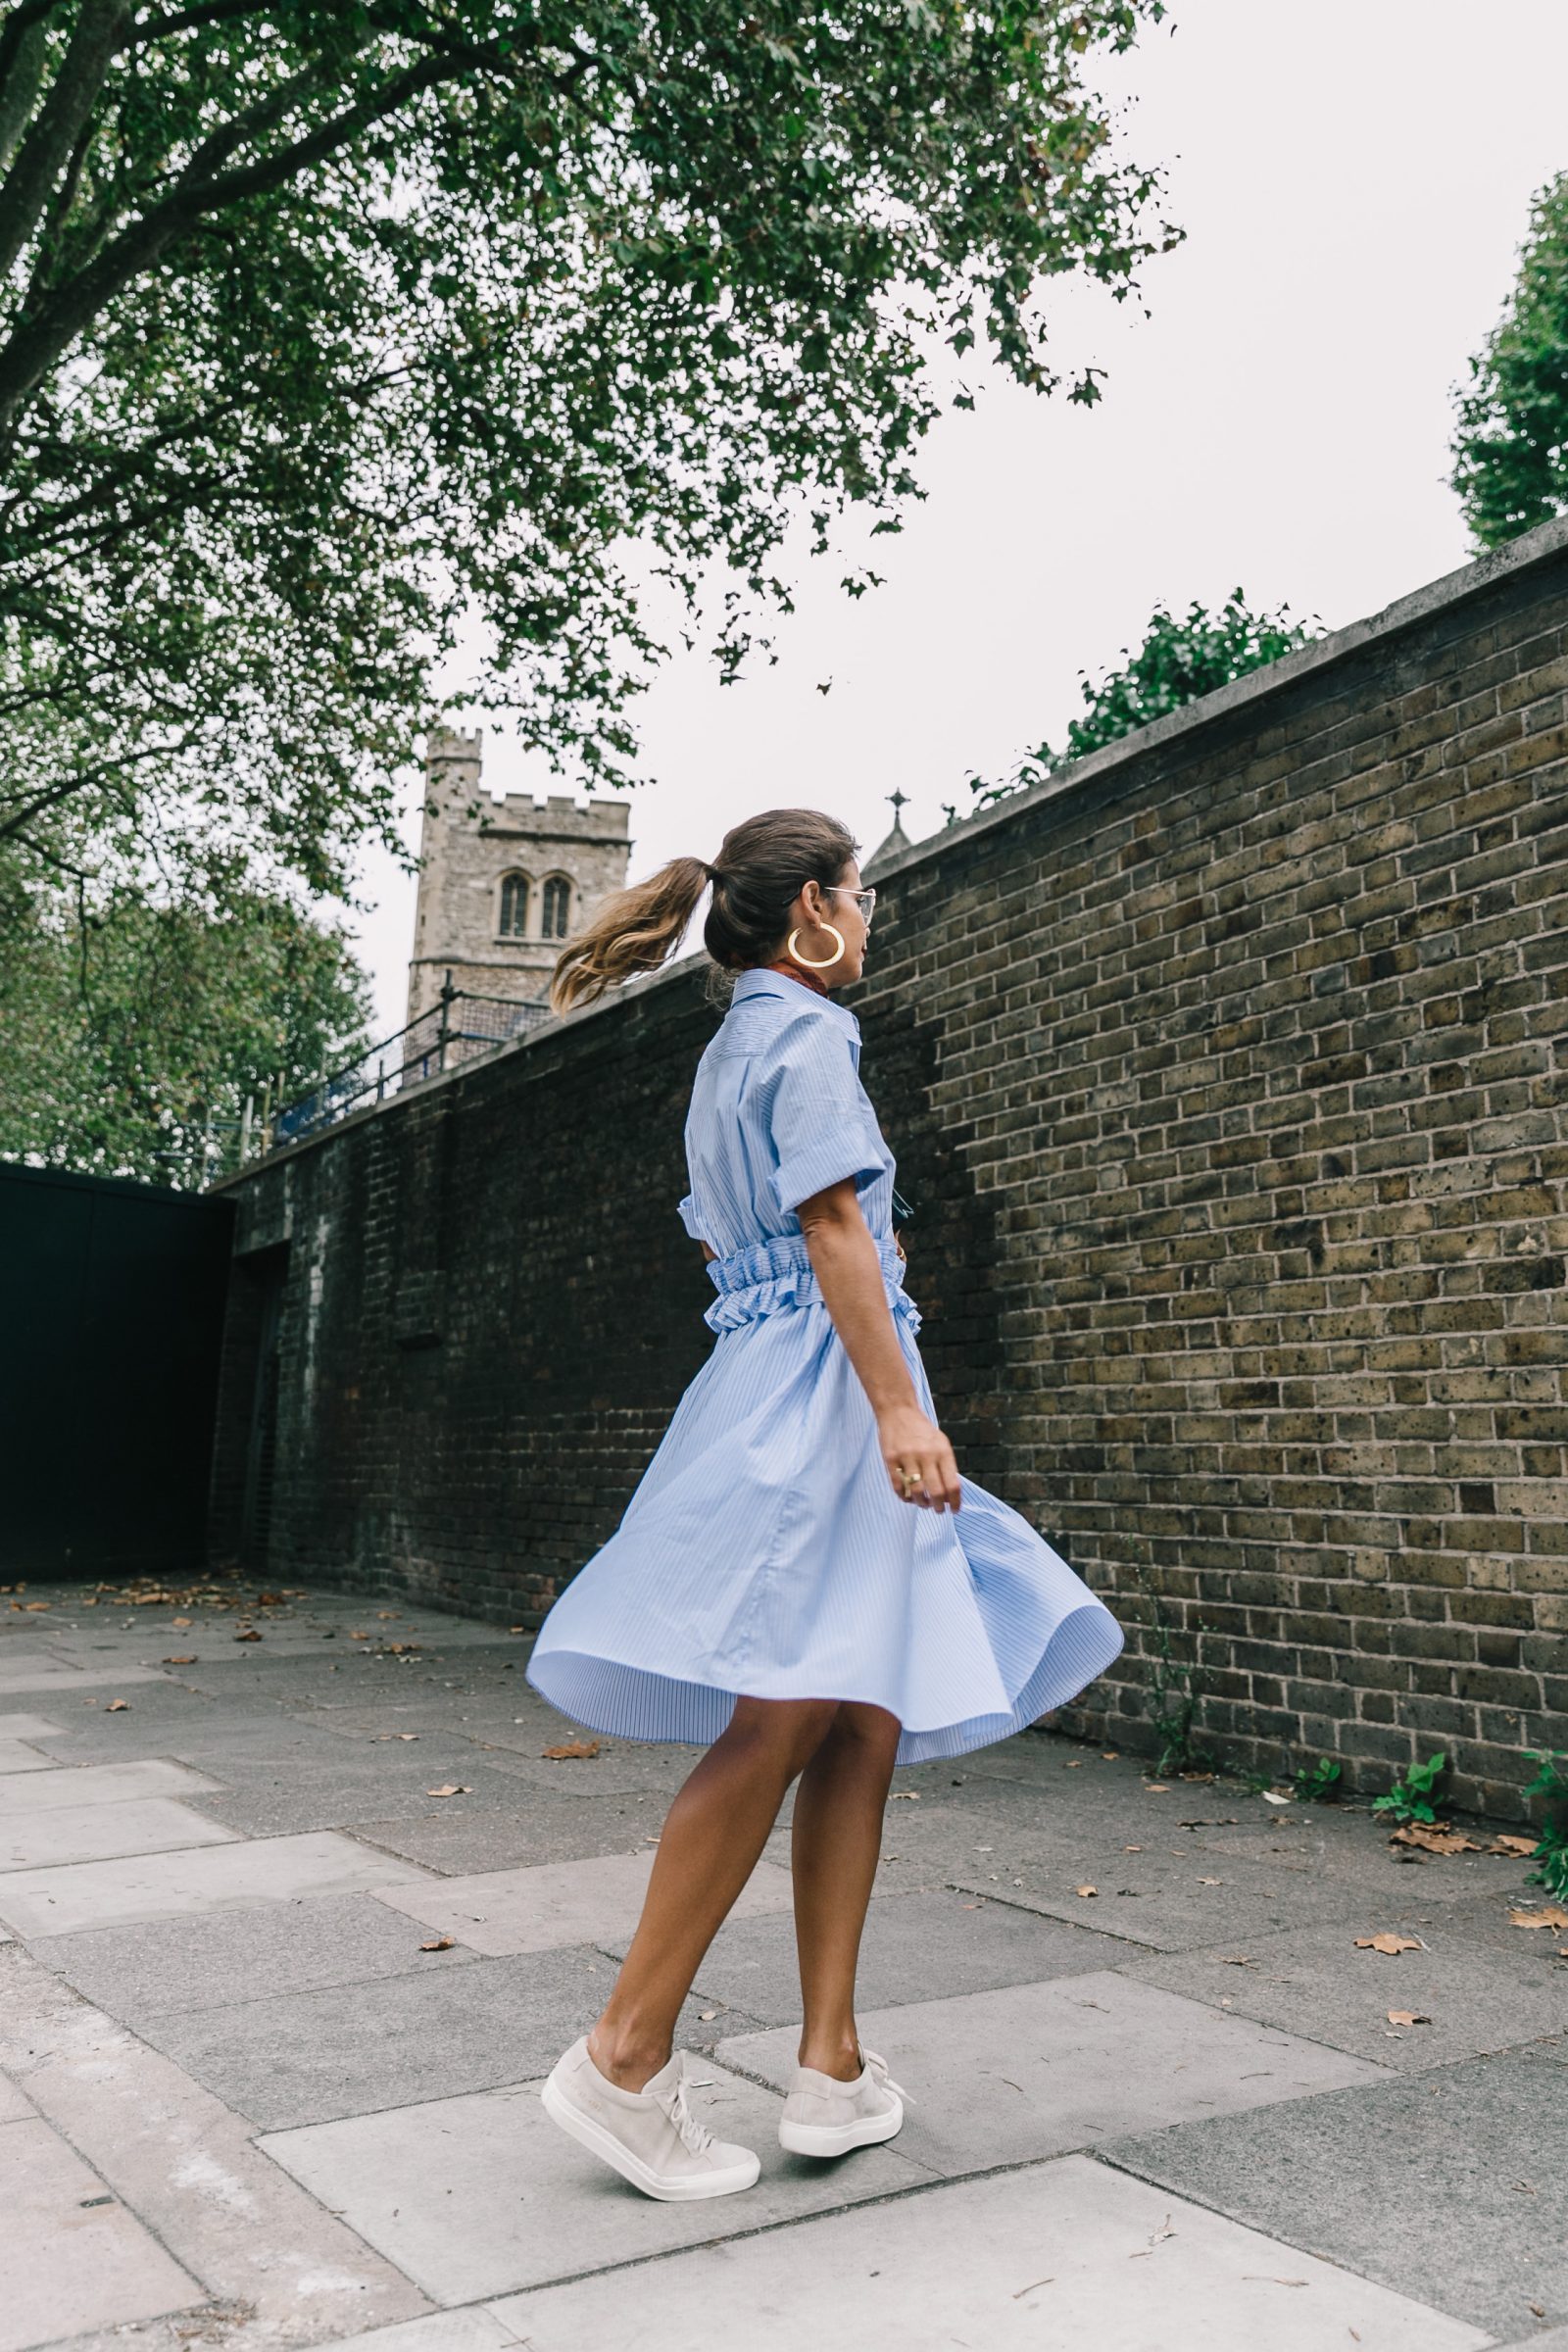 lfw-london_fashion_week_ss17-street_style-outfits-collage_vintage-vintage-stripped_dress-victoria_beckham-avenue_32-18